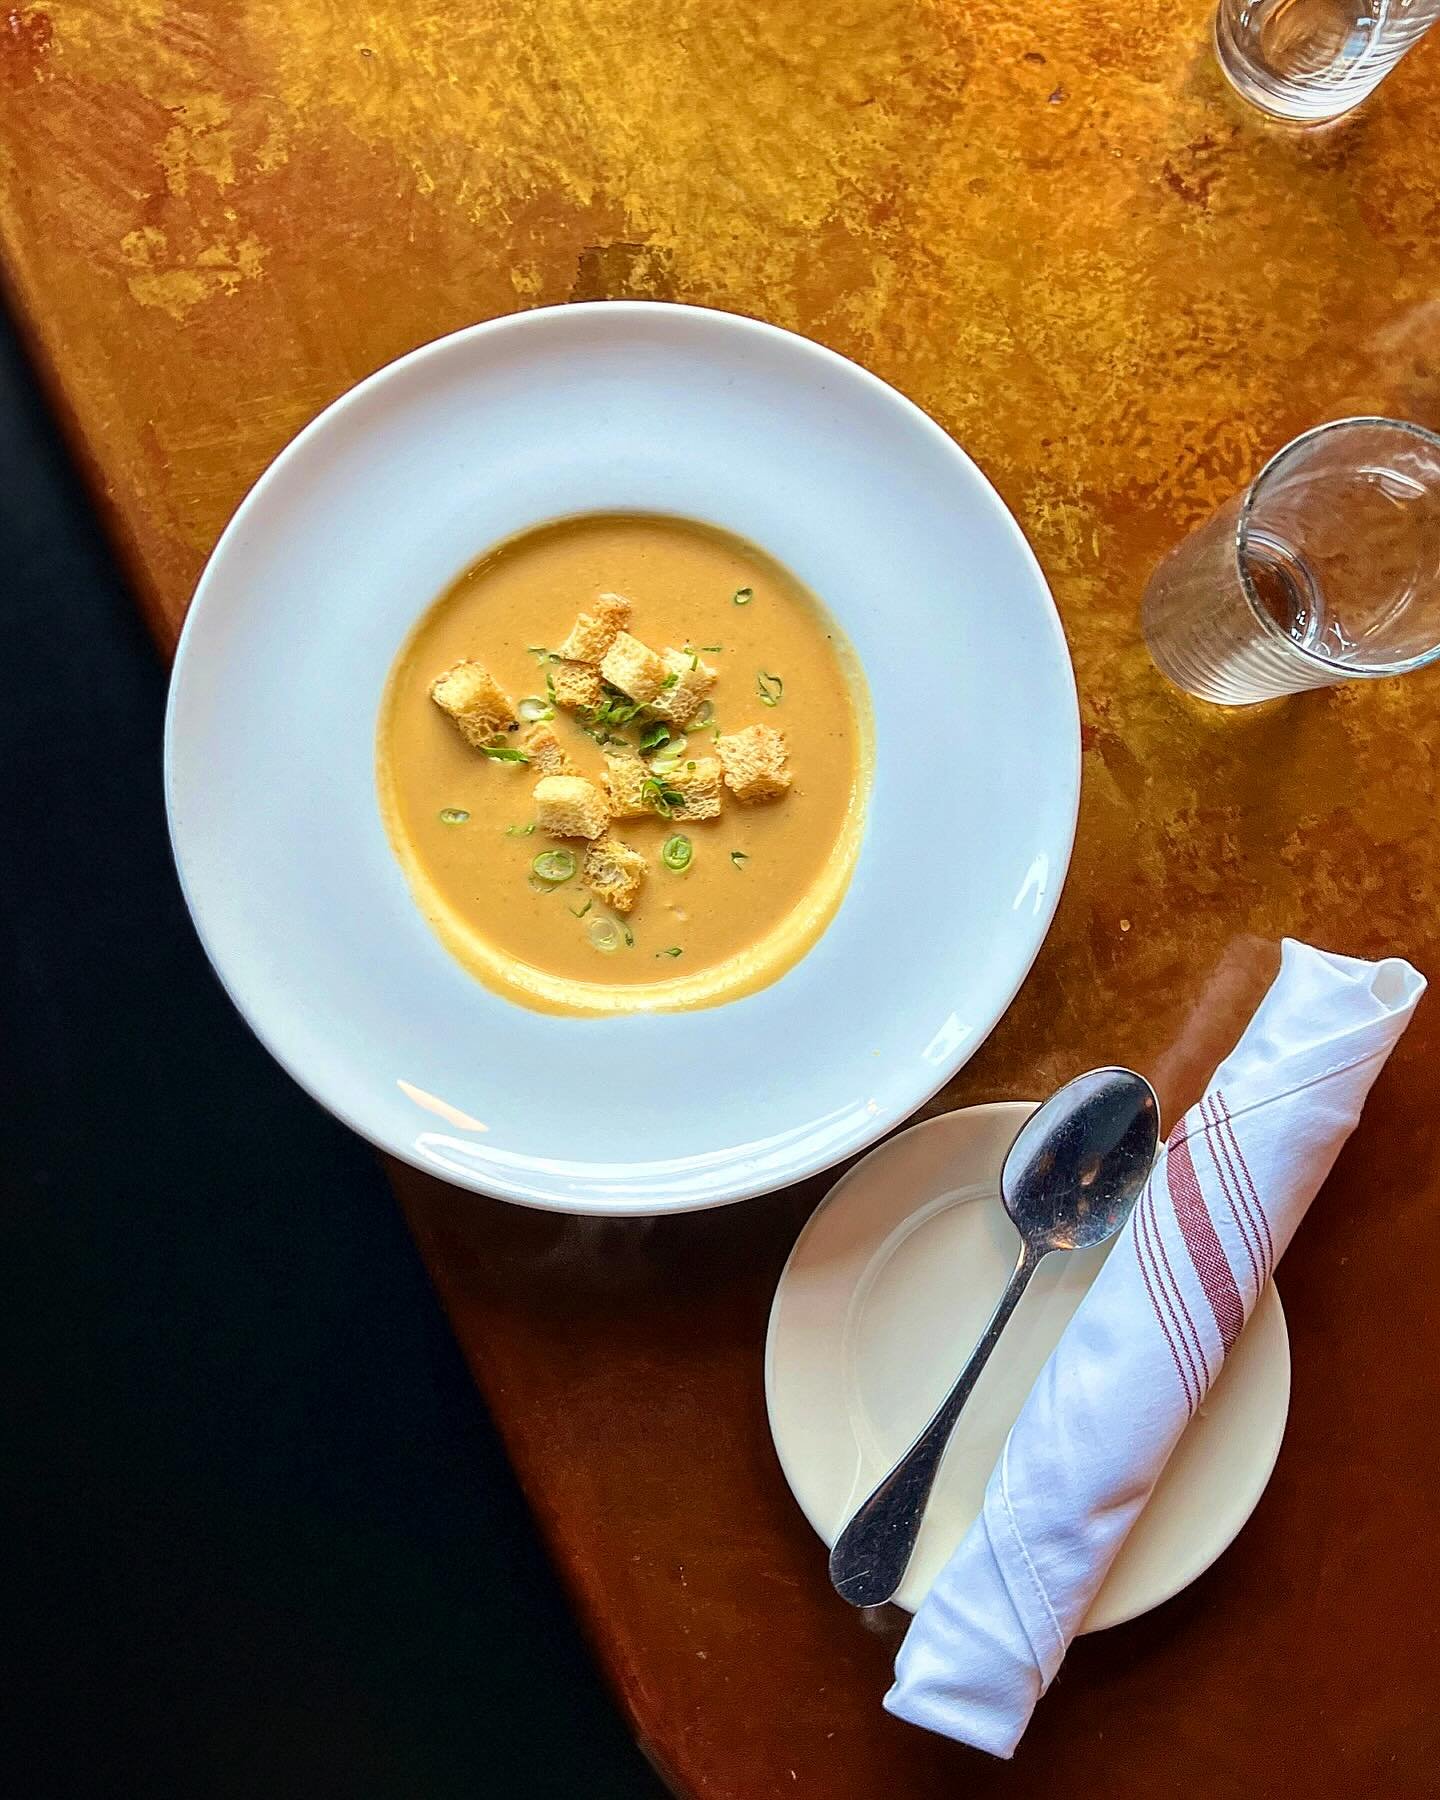 &ldquo;Our love for soup is souper serious.&rdquo;
Soup of the day: Lobster Bisque.
-
-
-
#washingtonsquareTavern #brooklineeats #bostontaven #soupoftheday